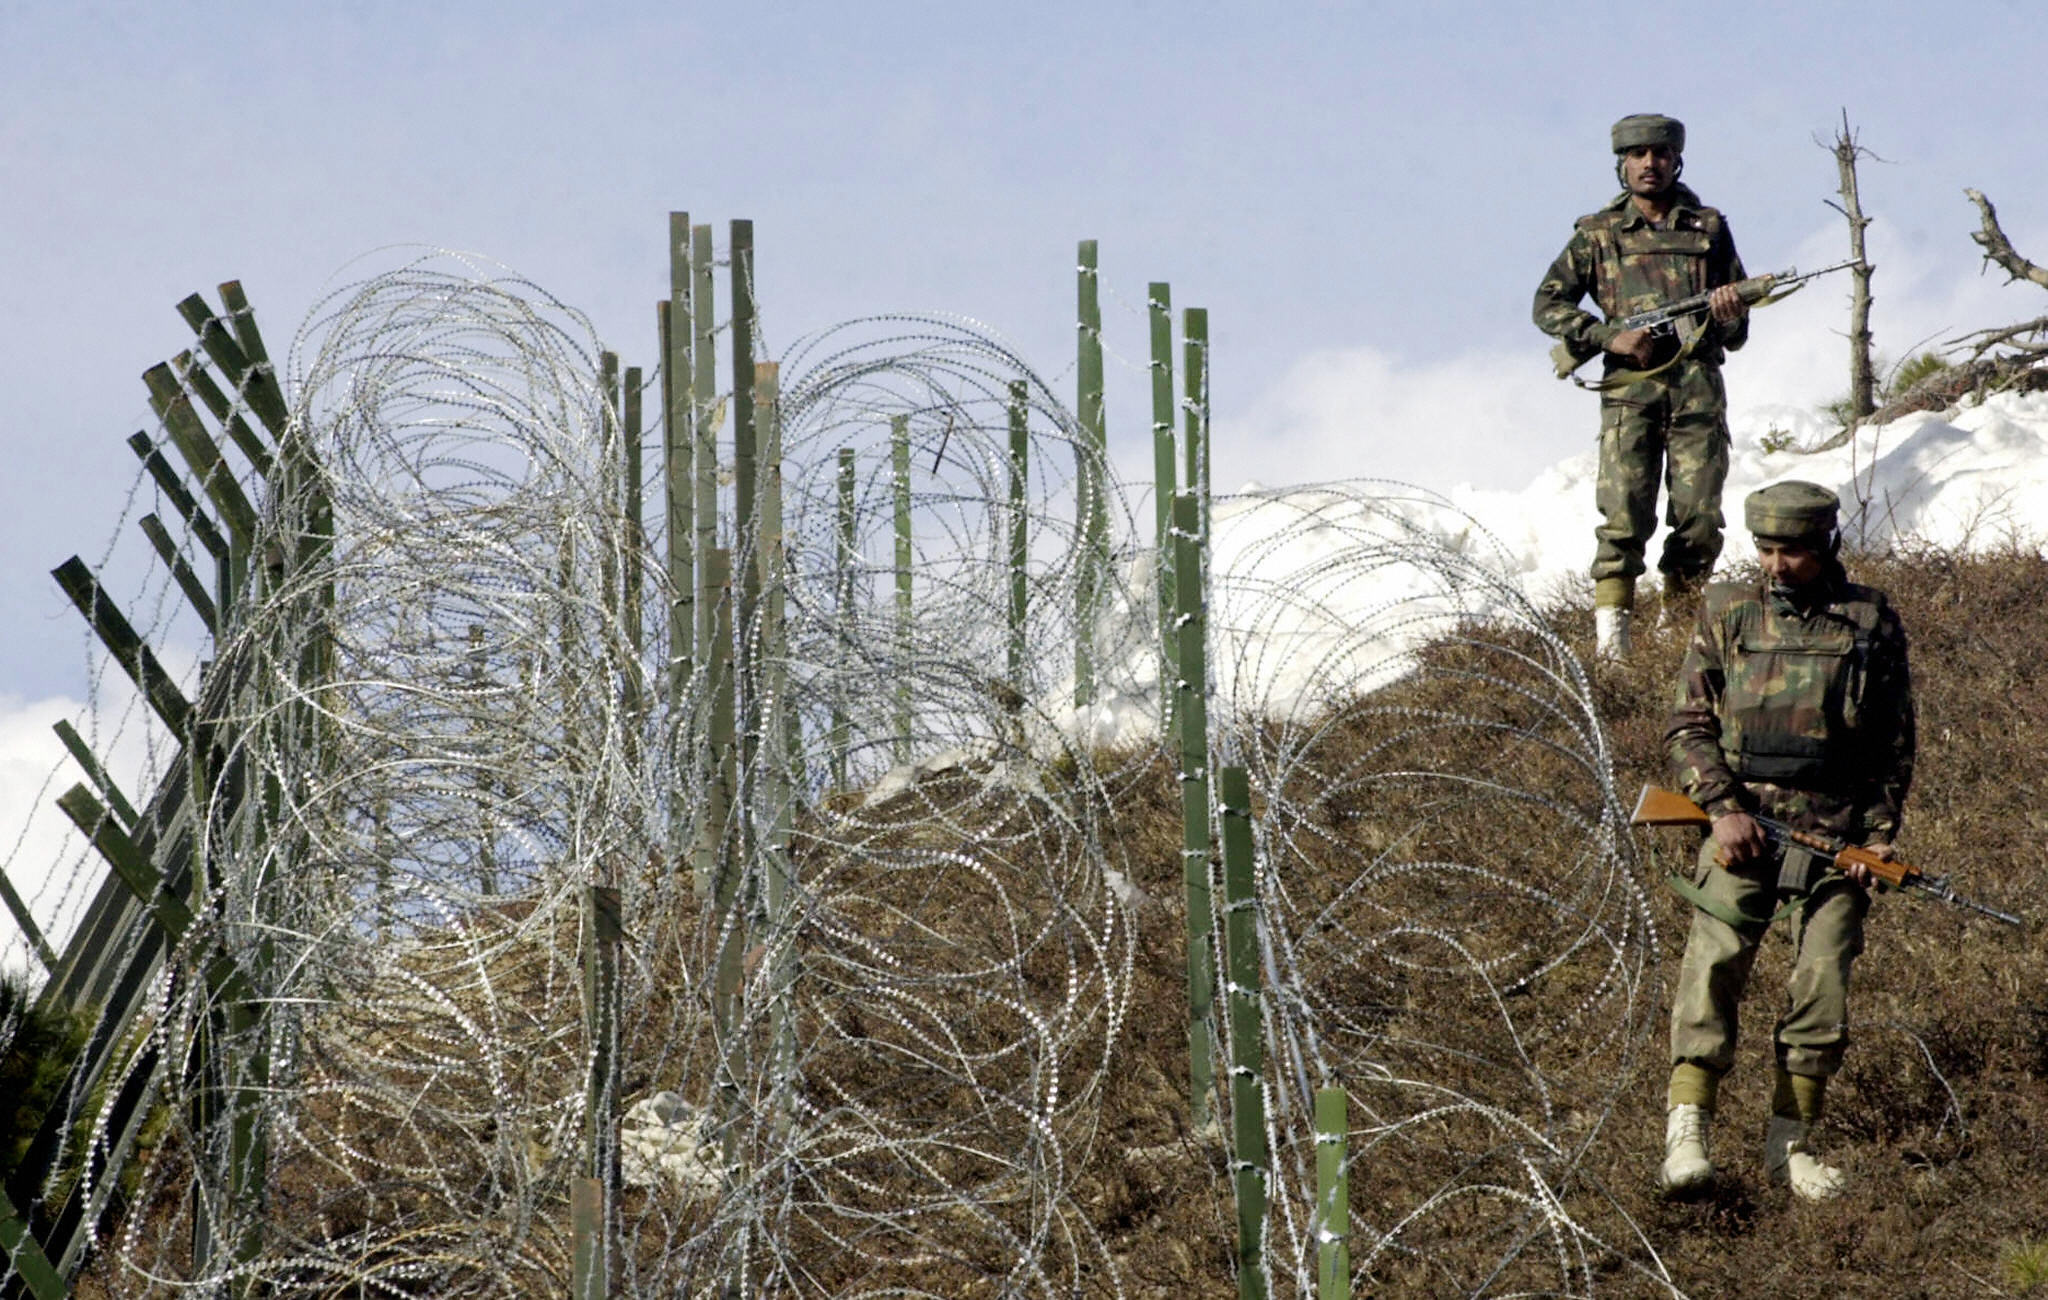 Indian soldiers patrol along a barbed-wire fence, 04 December 2003, near Baras Post on the Line of Control (LoC) between Pakistan and India some 174 kilometers north west of Srinagar. (SAJJAD HUSSAIN/AFP via Getty Images)